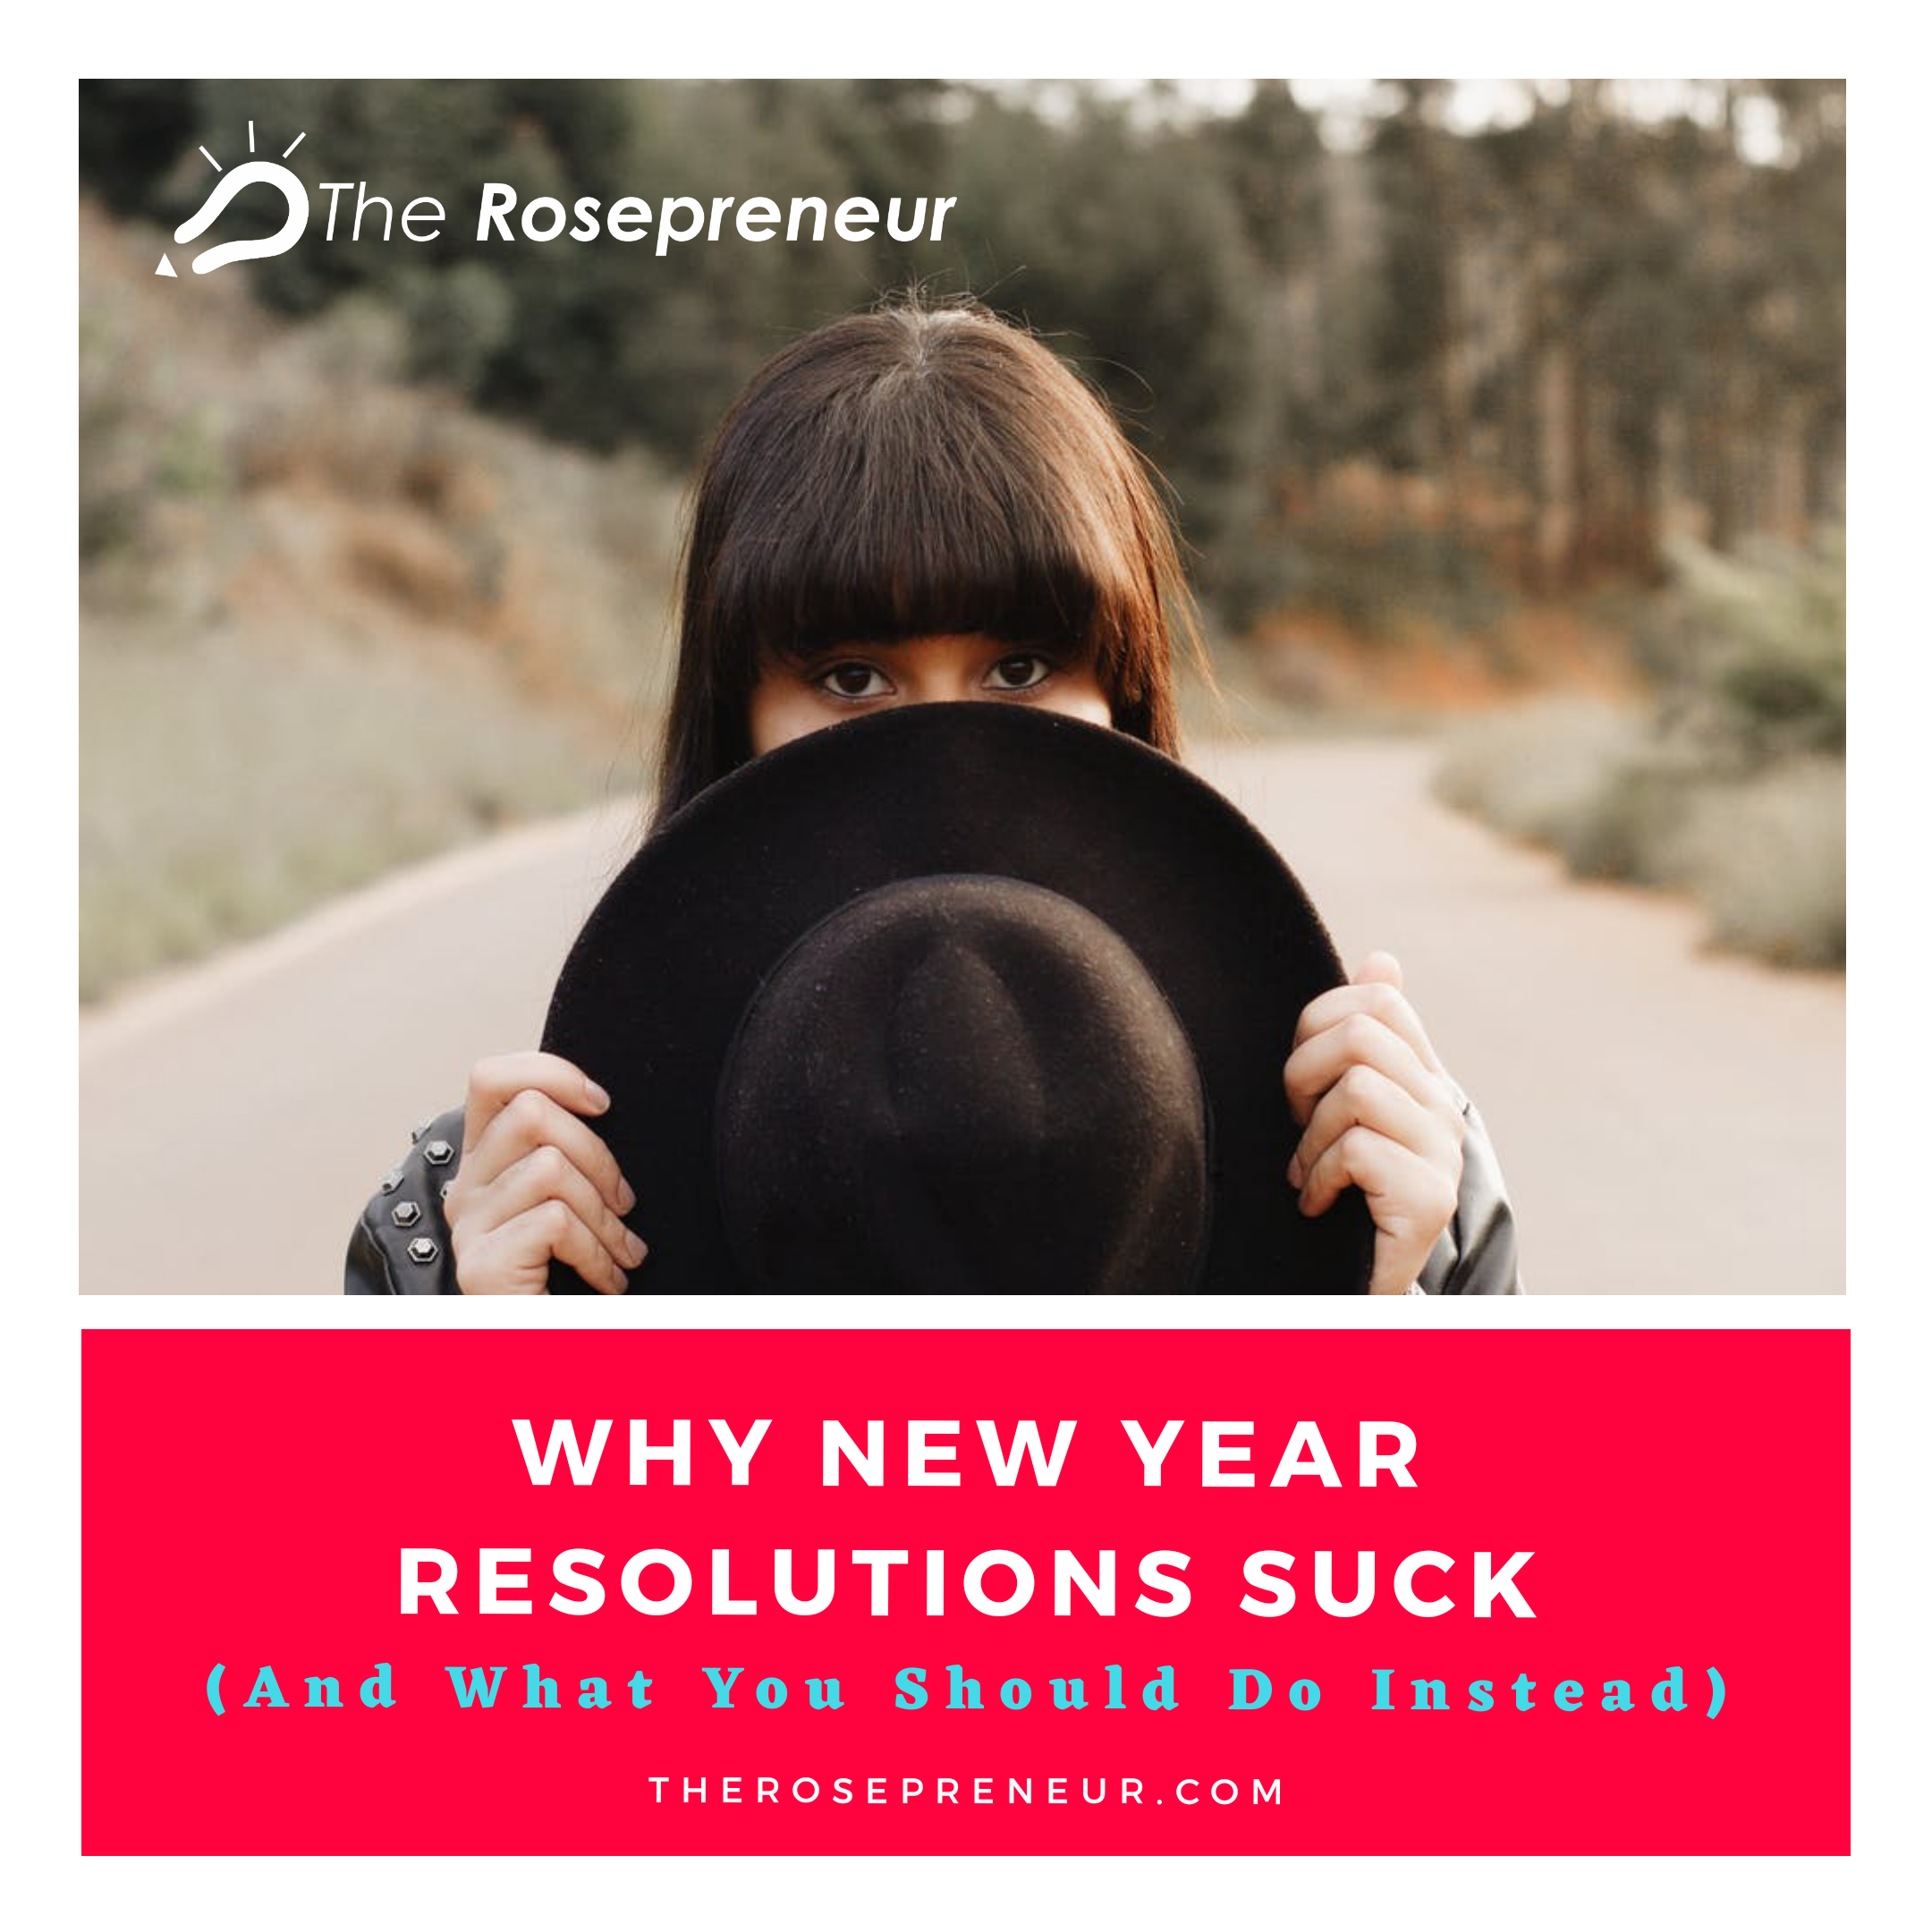 Why New Year Resolutions Suck And What You Should Do Instead